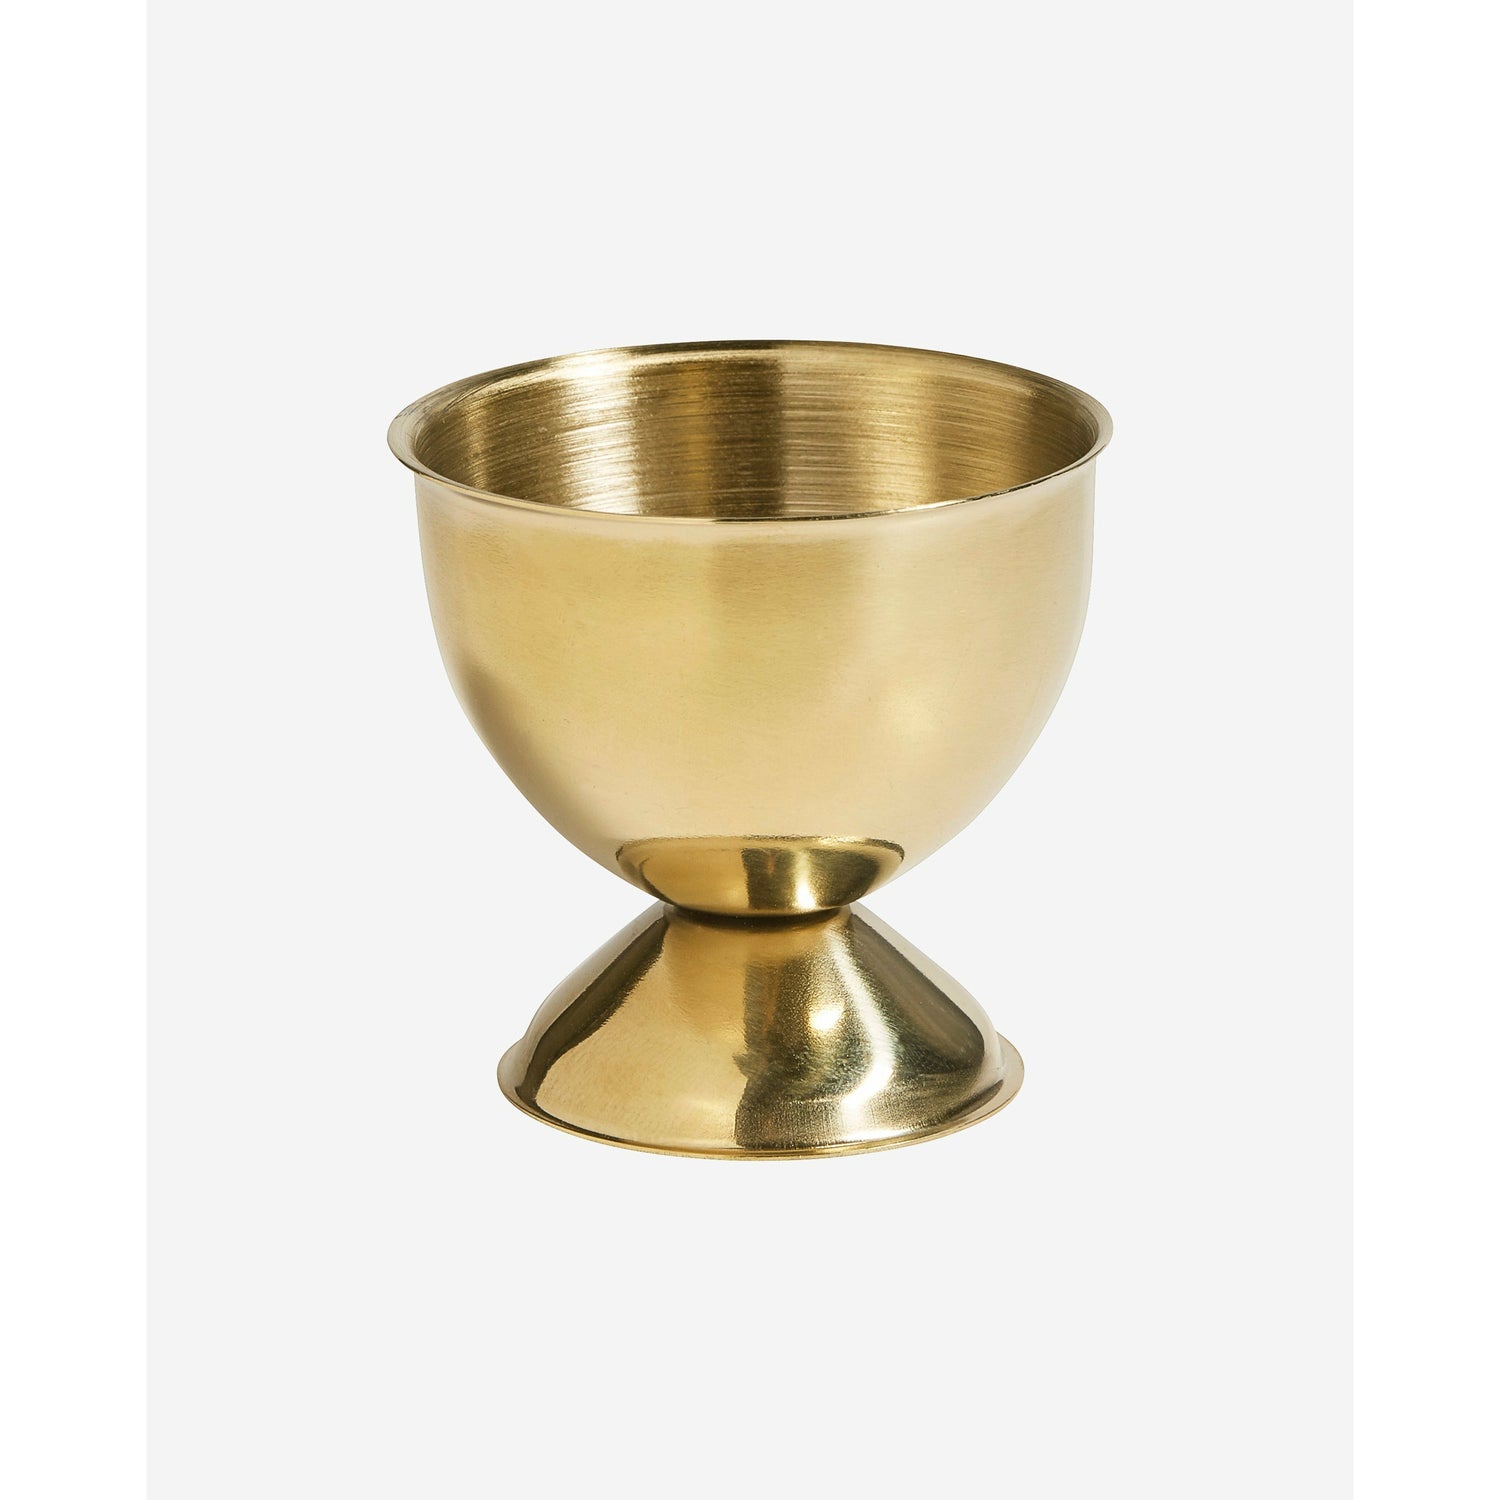 Nordal - Egg cup in stainless steel - gold finish